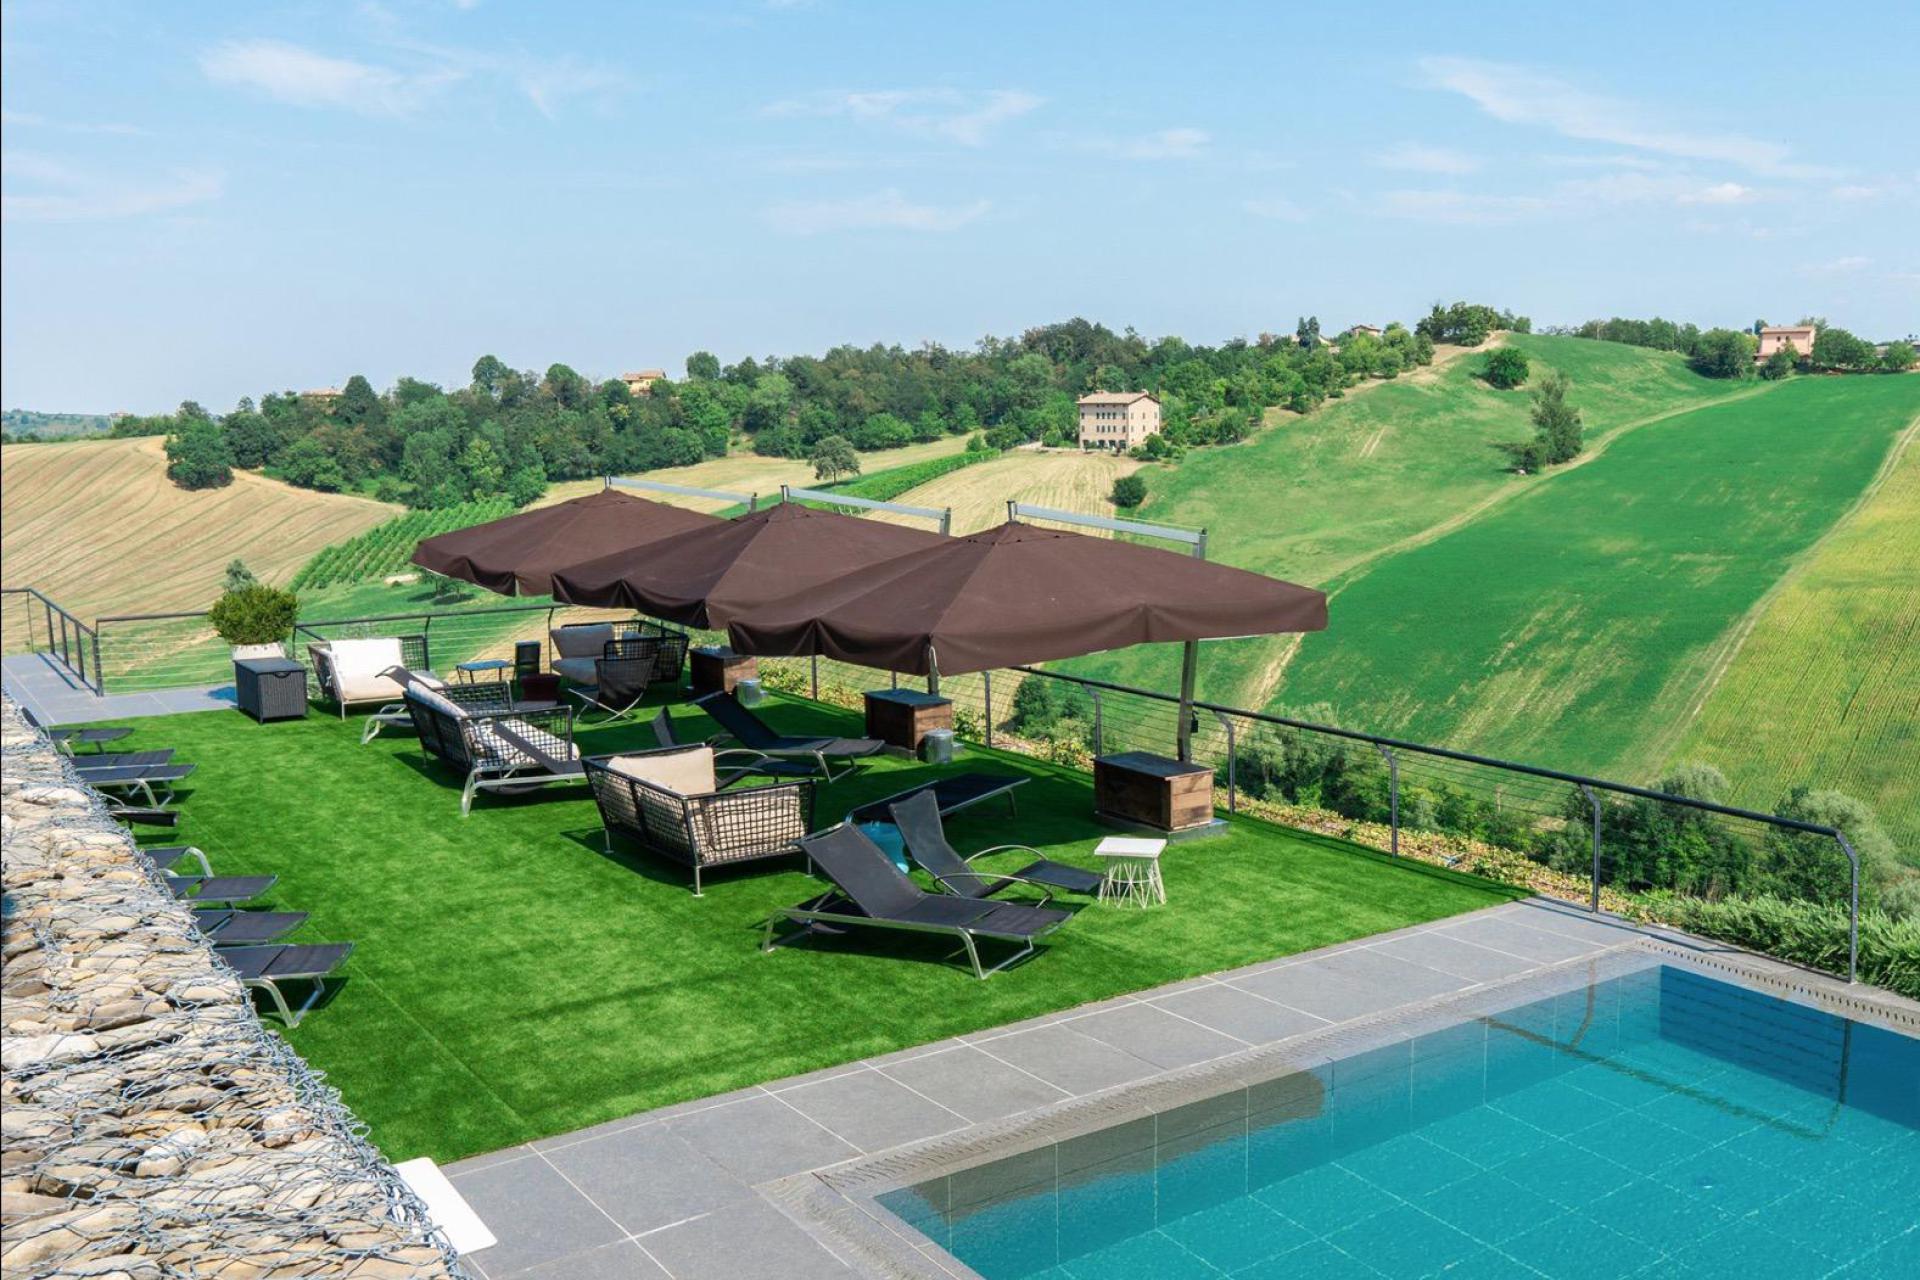 Agriturismo with pool, bar and restaurant